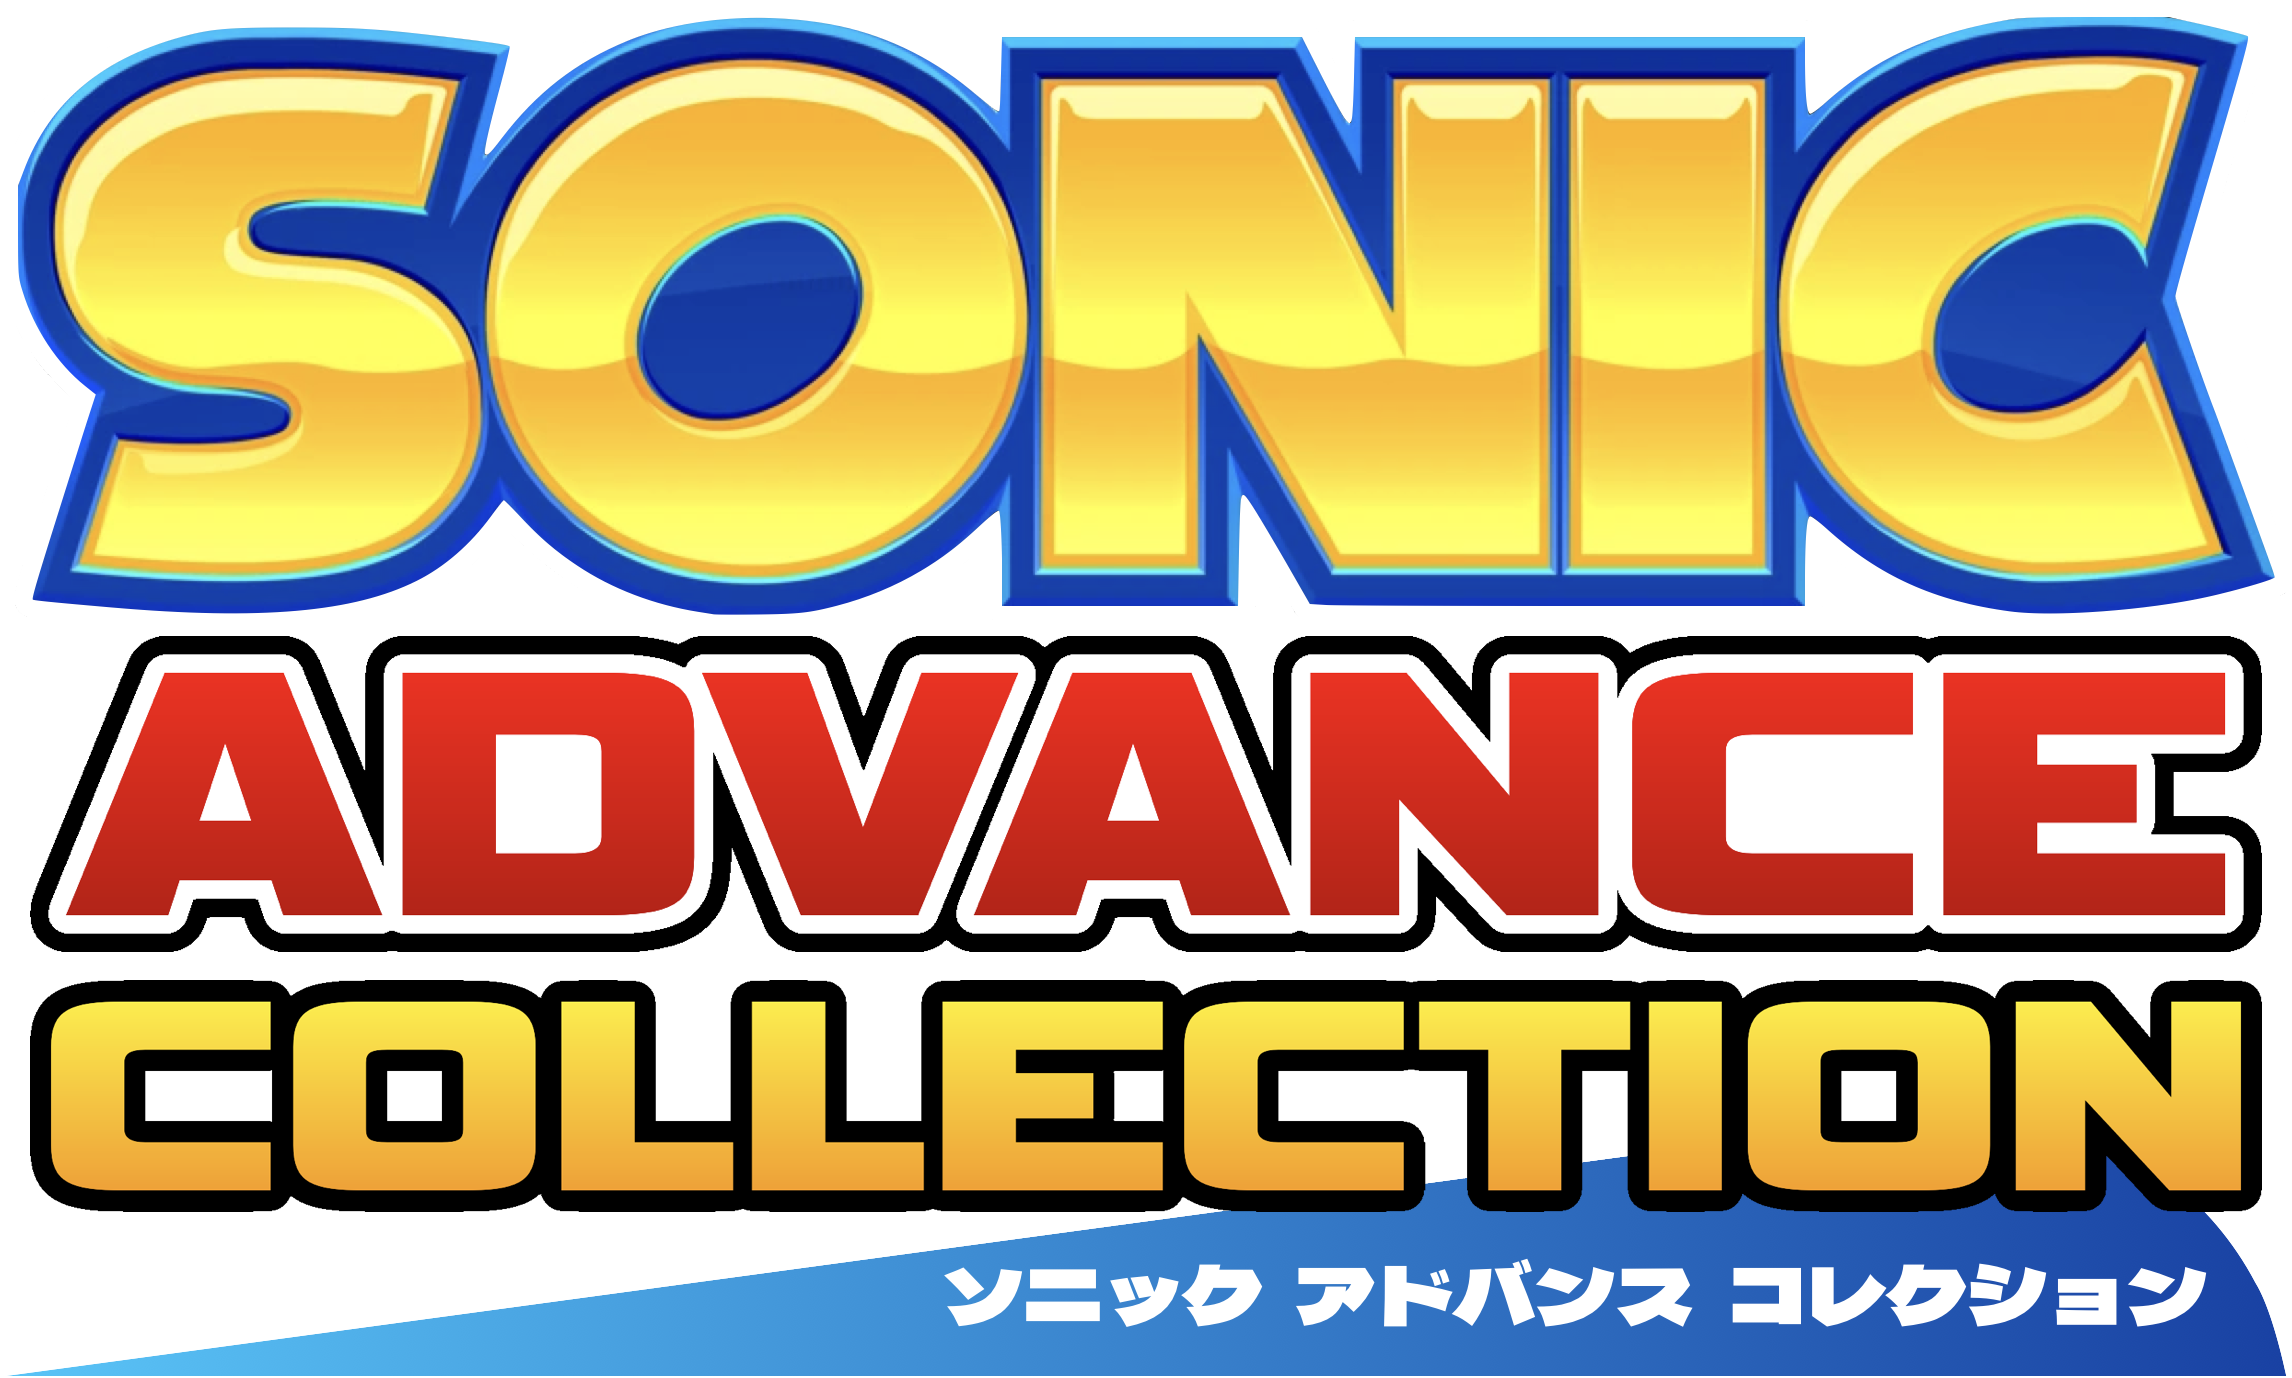 Sonic Classic Collection by gxigames12 on DeviantArt